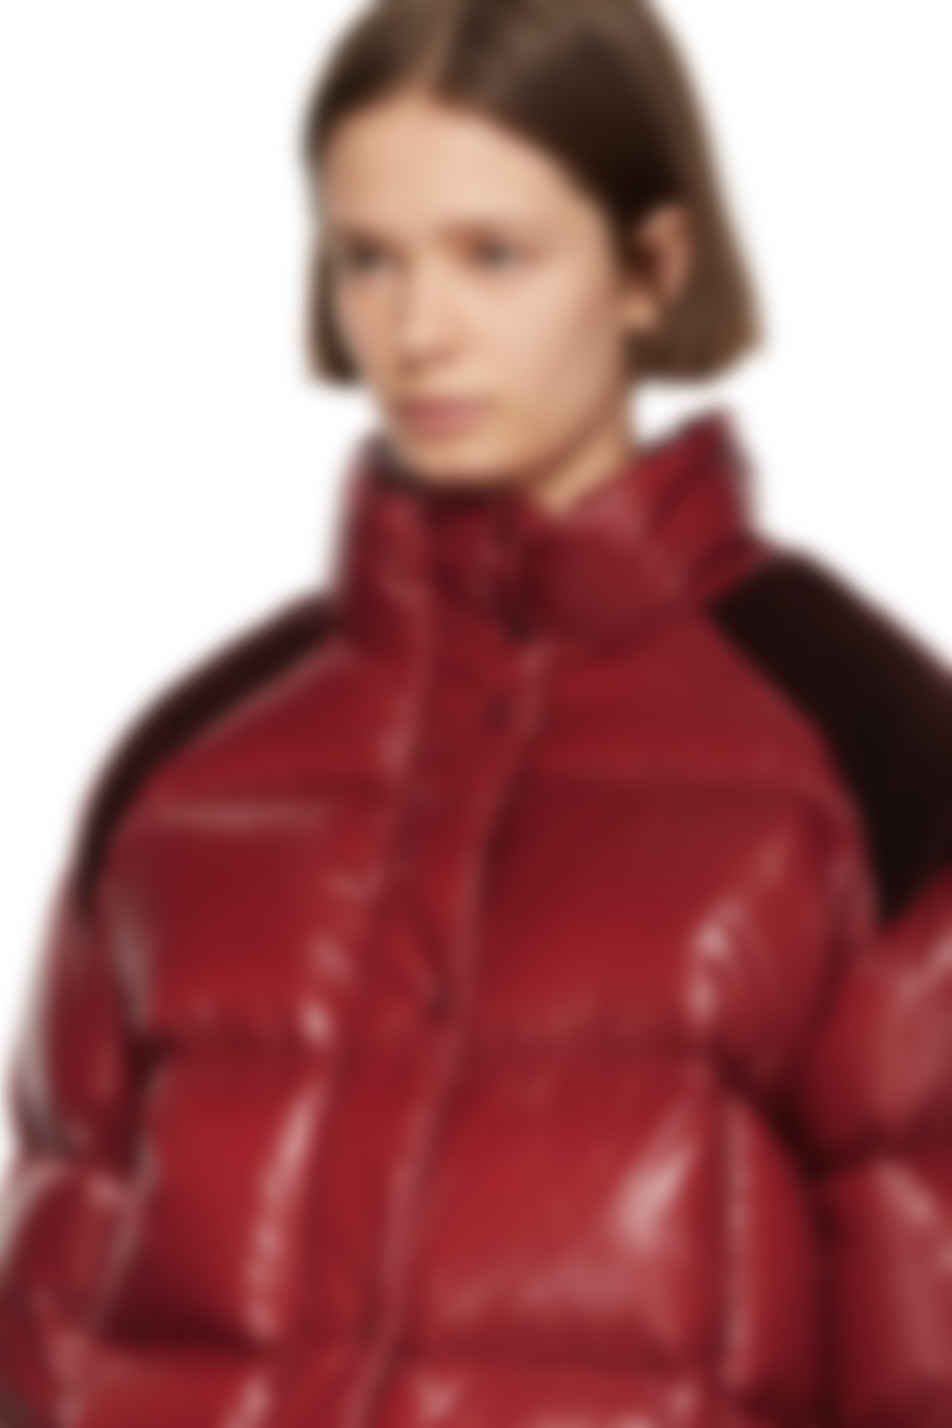 2 Moncler 1952 Red Chouette Down Jacket 